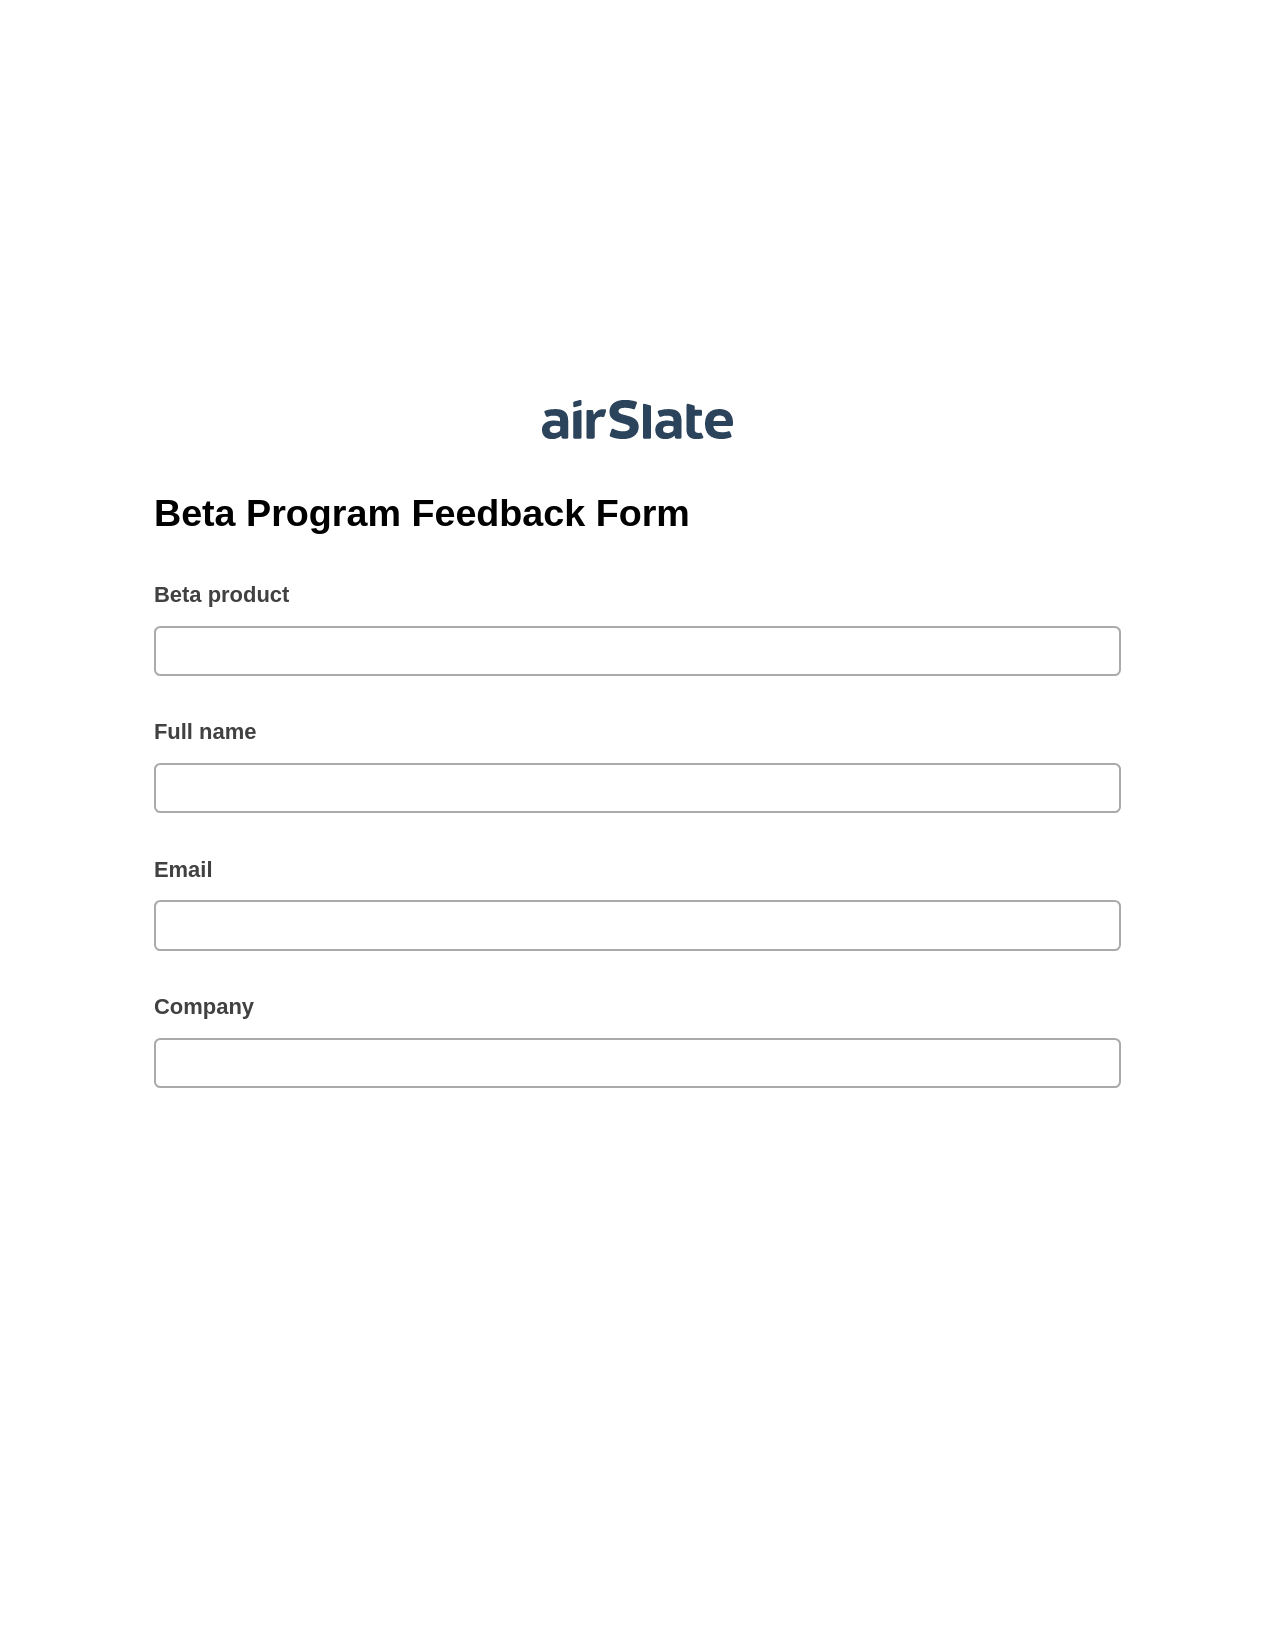 Multirole Beta Program Feedback Form Pre-fill from Litmos bot, Set Signature Type Bot, Export to Formstack Documents Bot